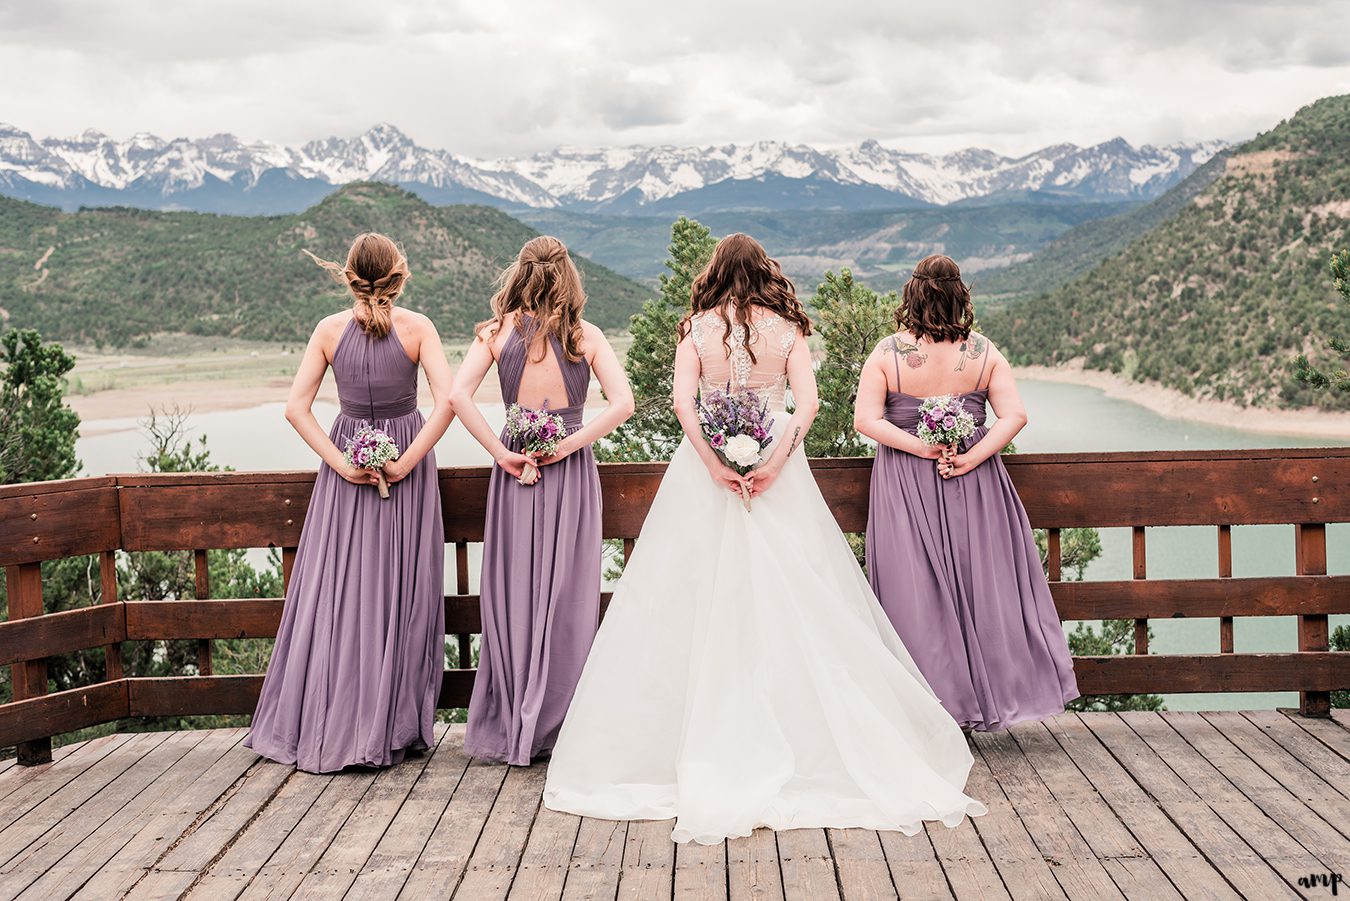 Erica and her bridesmaids hold their bouquets at the Ridgway State Park Overlook